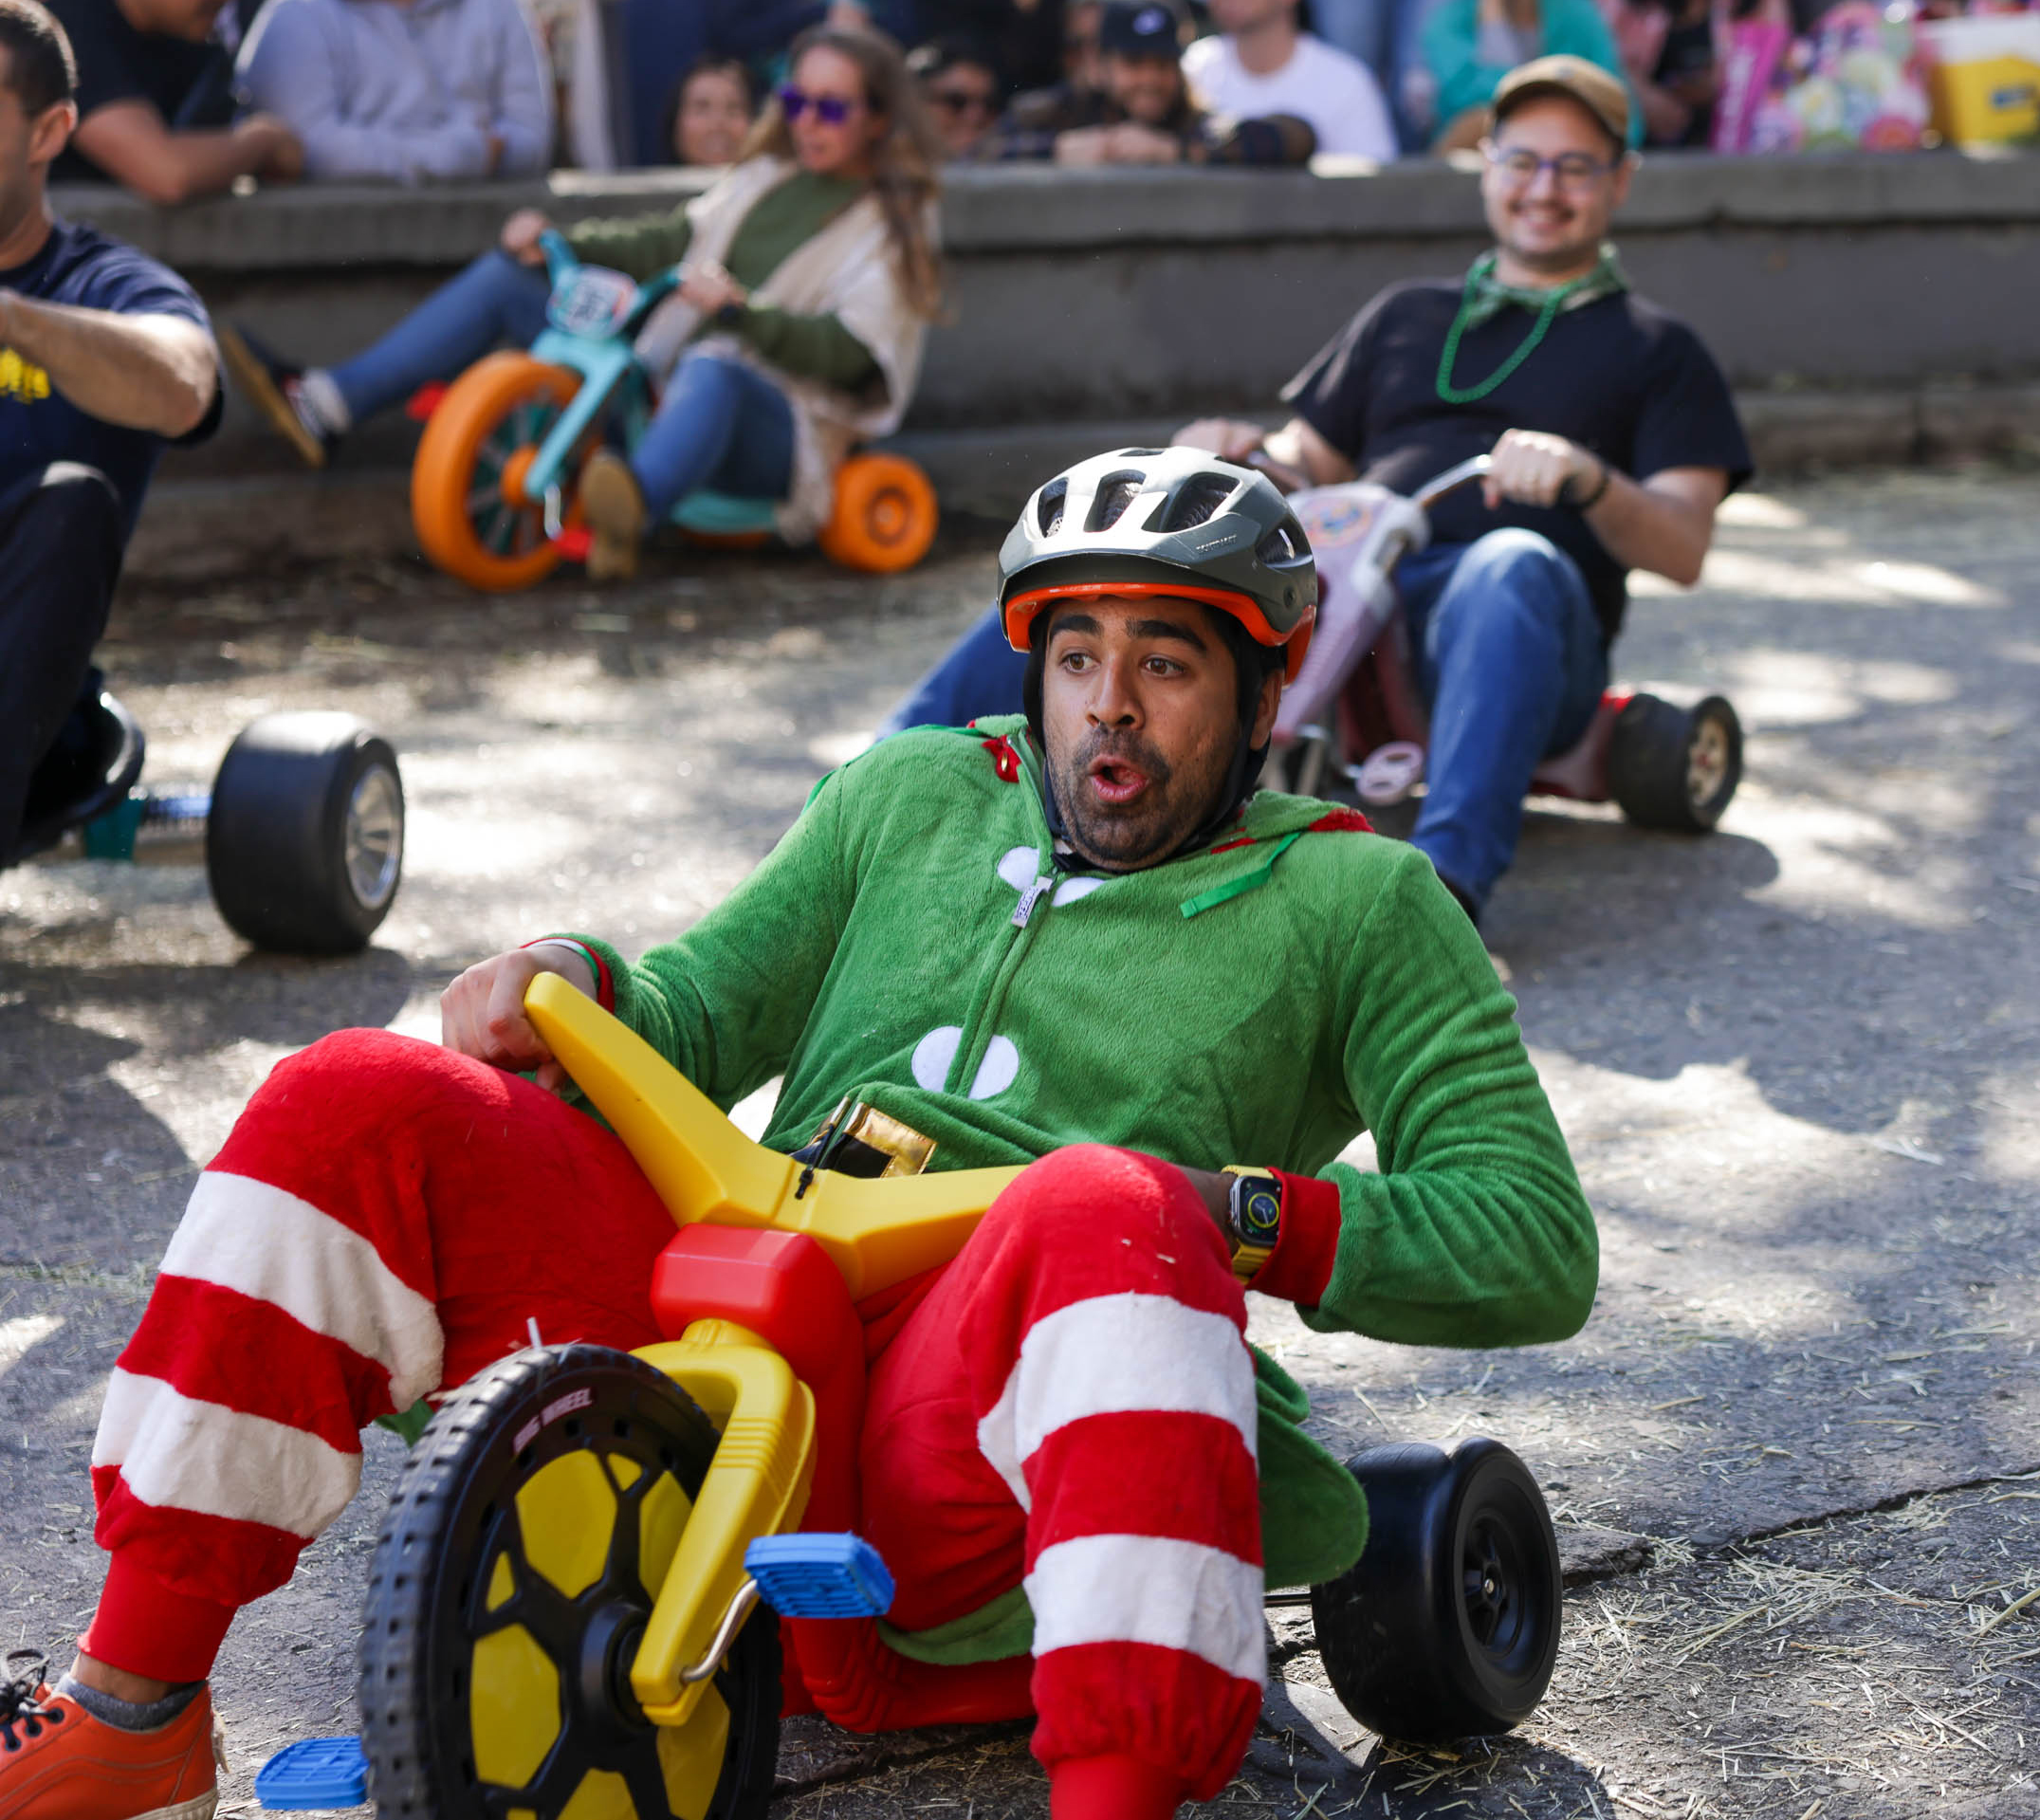 A person in an elf costume races downhill on a toy tricycle, looking amused, as onlookers watch.